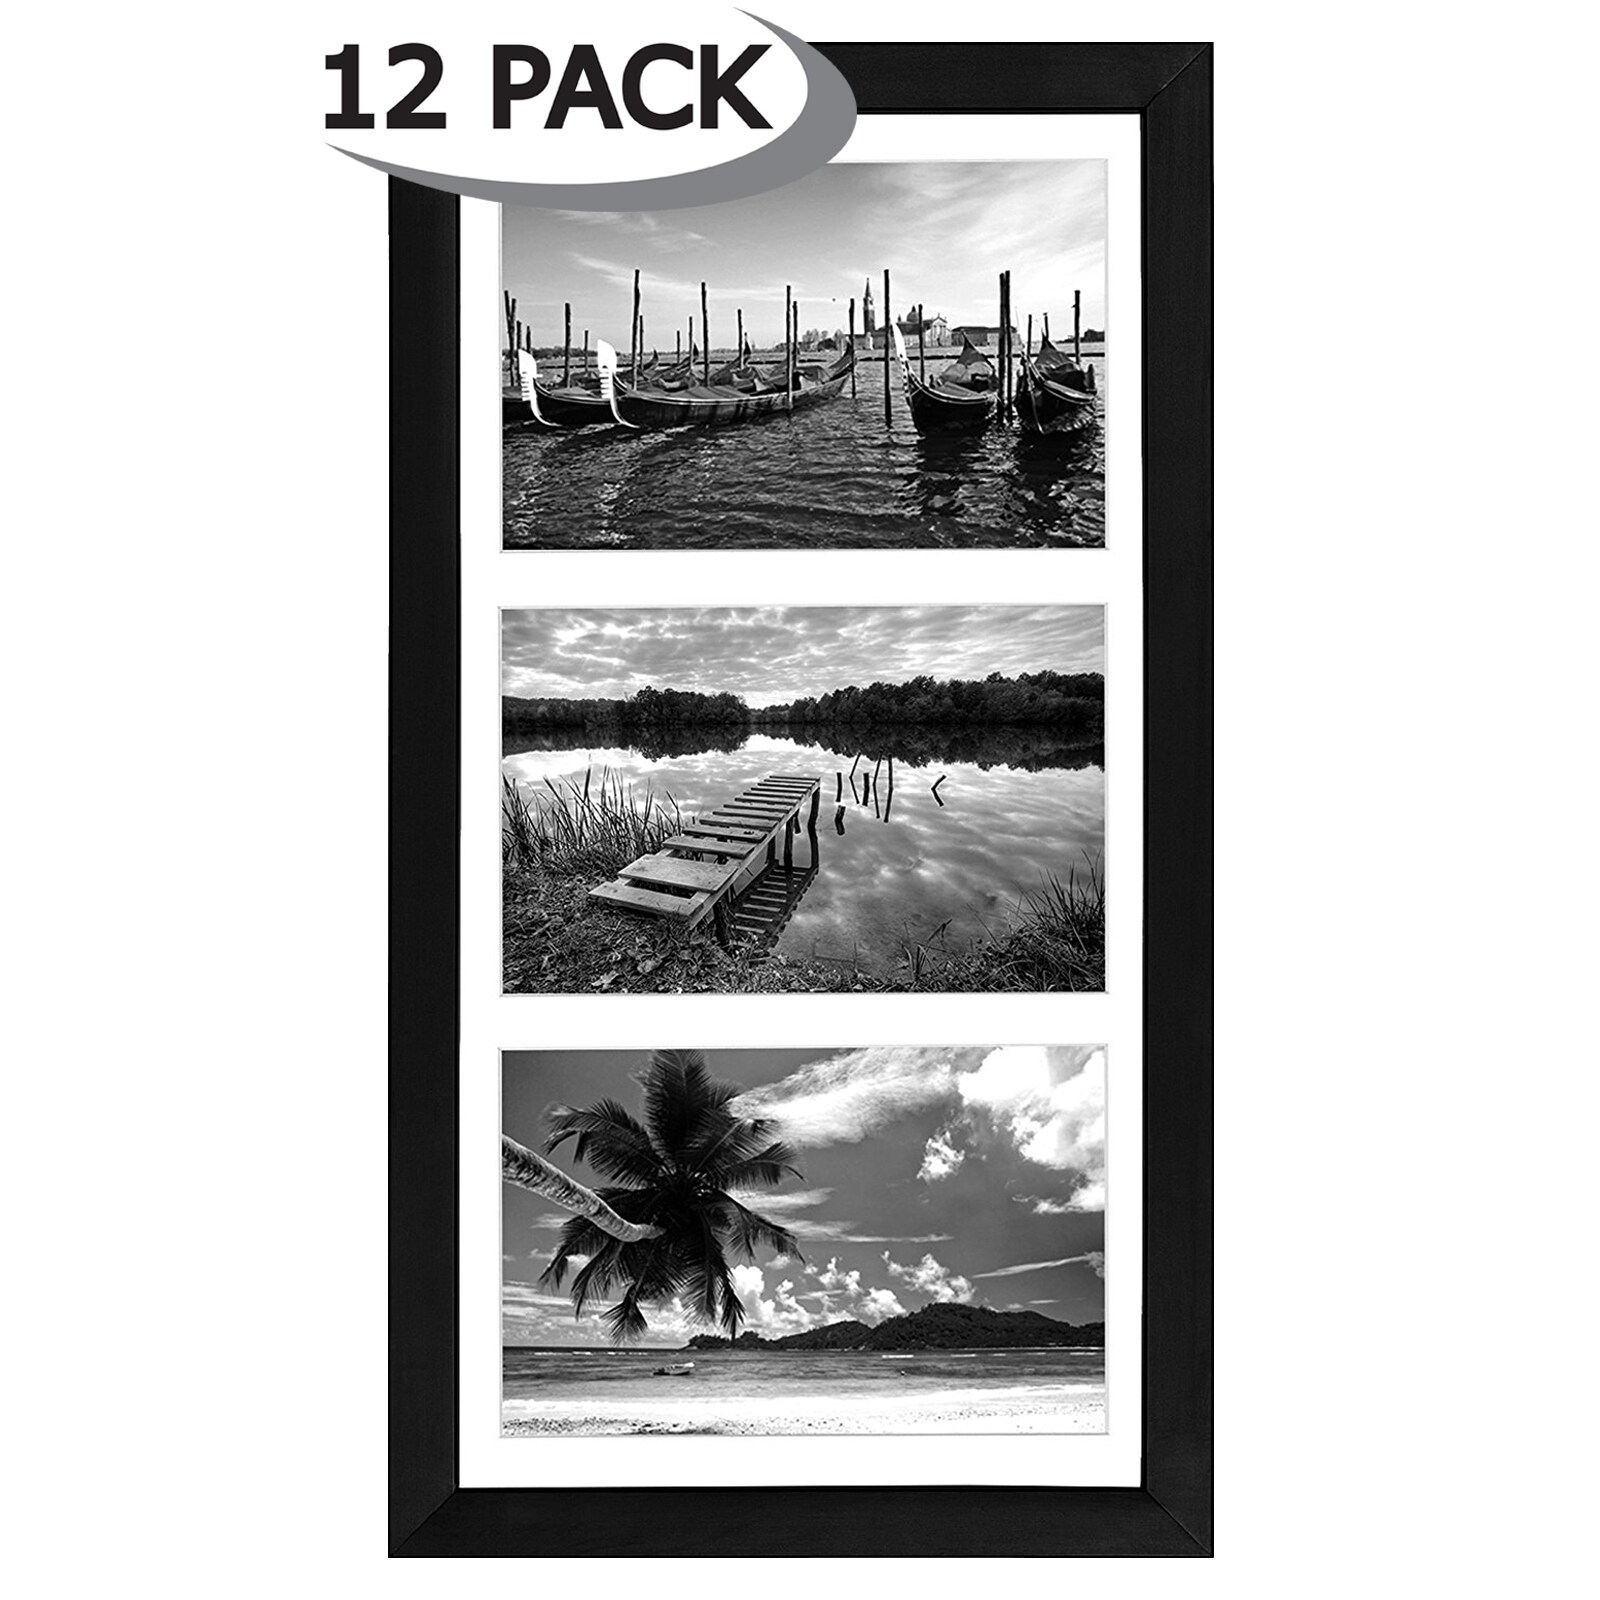 Display Pictures 5x7 Inches Americanflat 12 Pack 5x7 Picture Frames